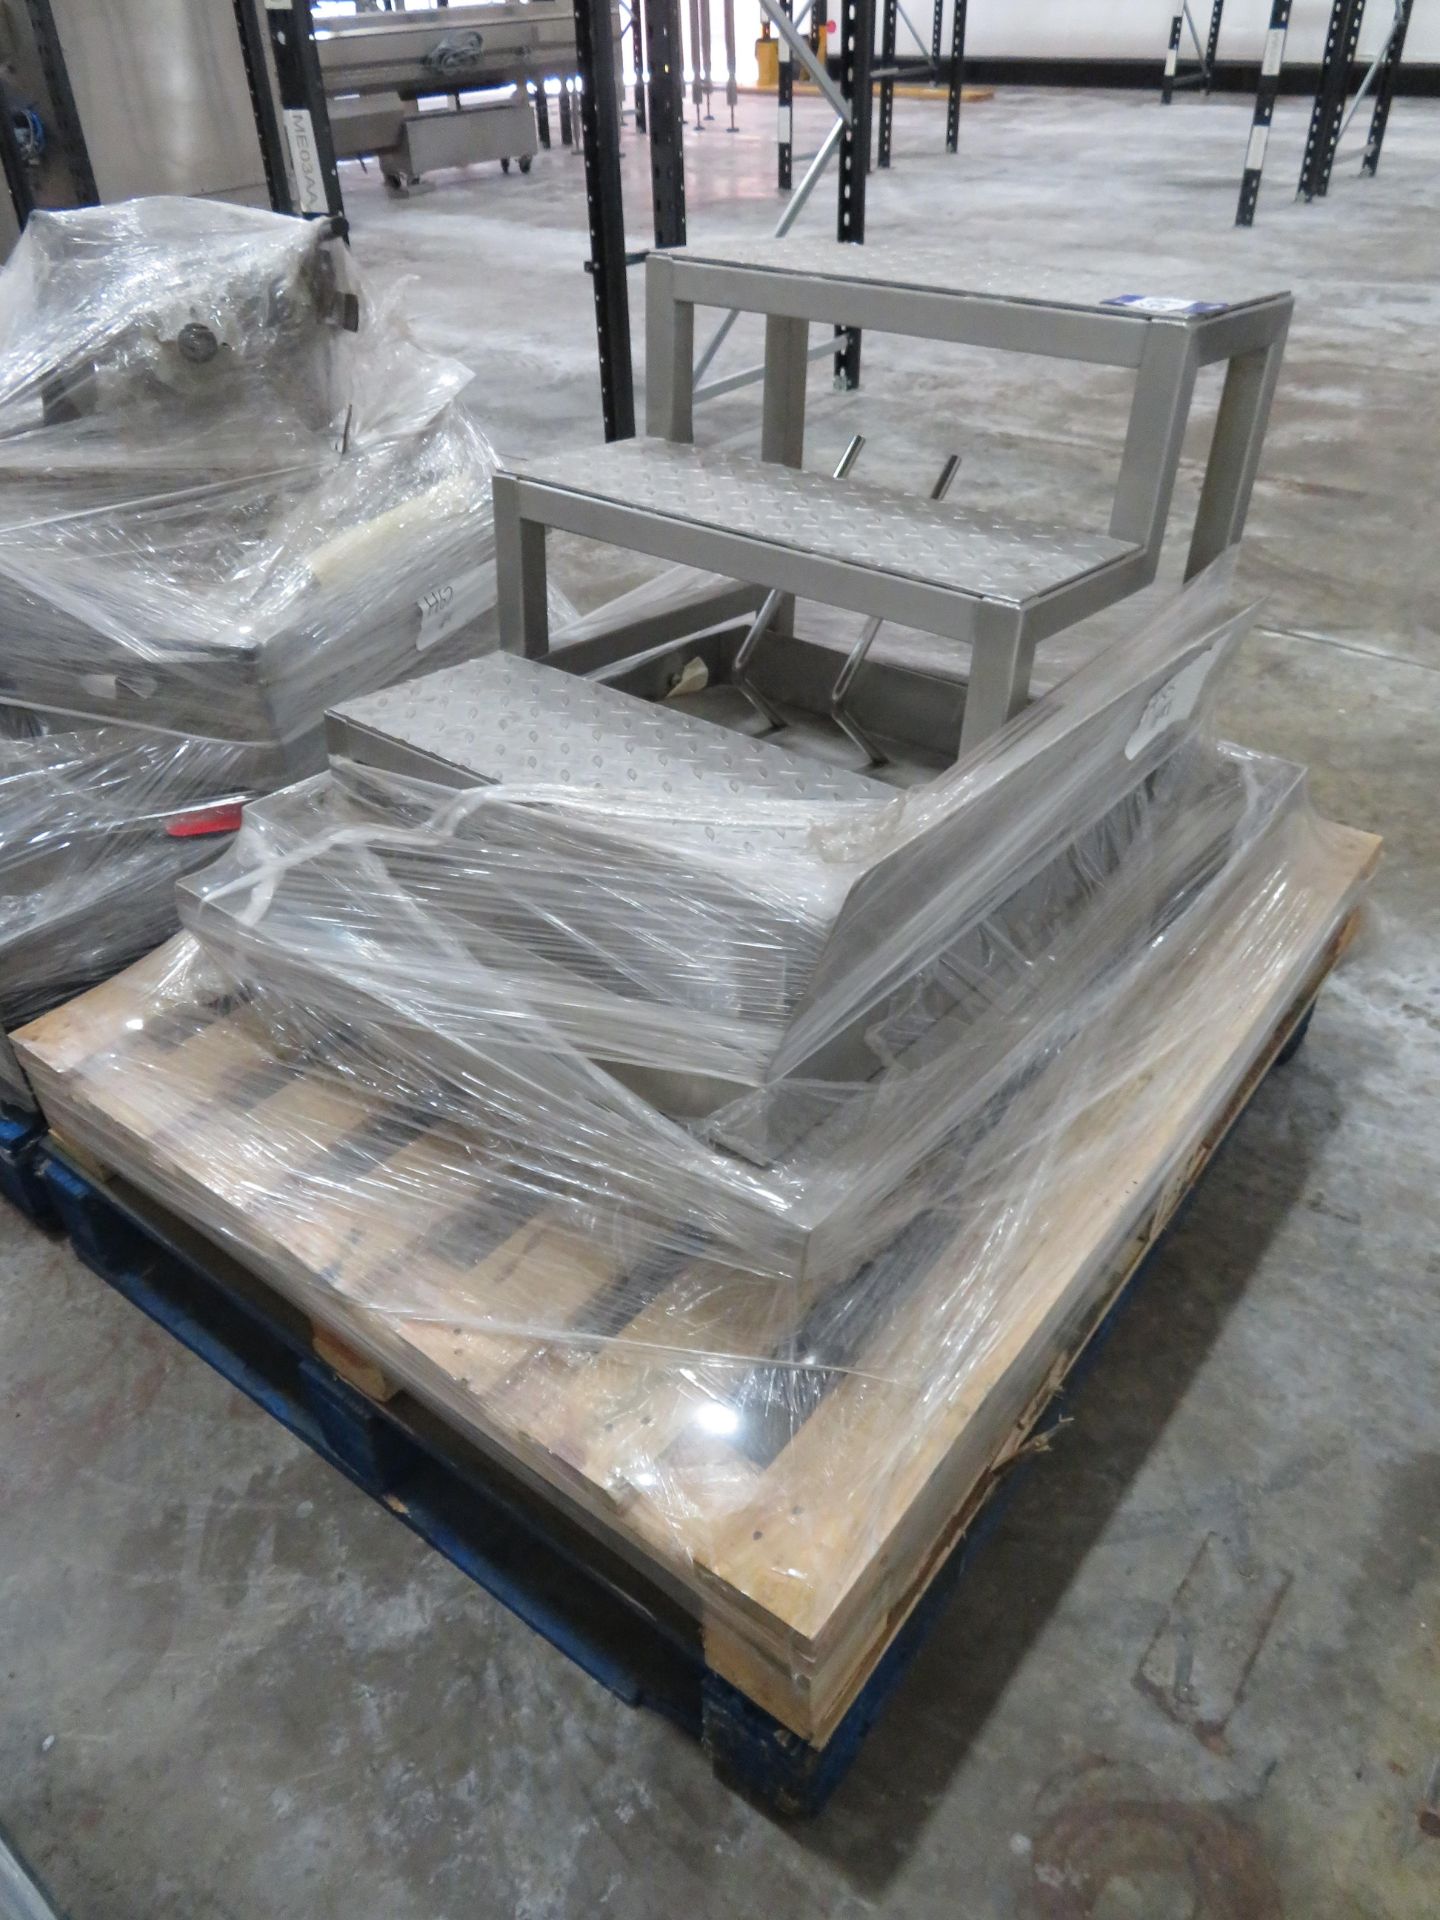 4 assorted pallets - 3 step SS steps, SS tray, SS Bin bag holder, SS Control panel, Genie B scrubber